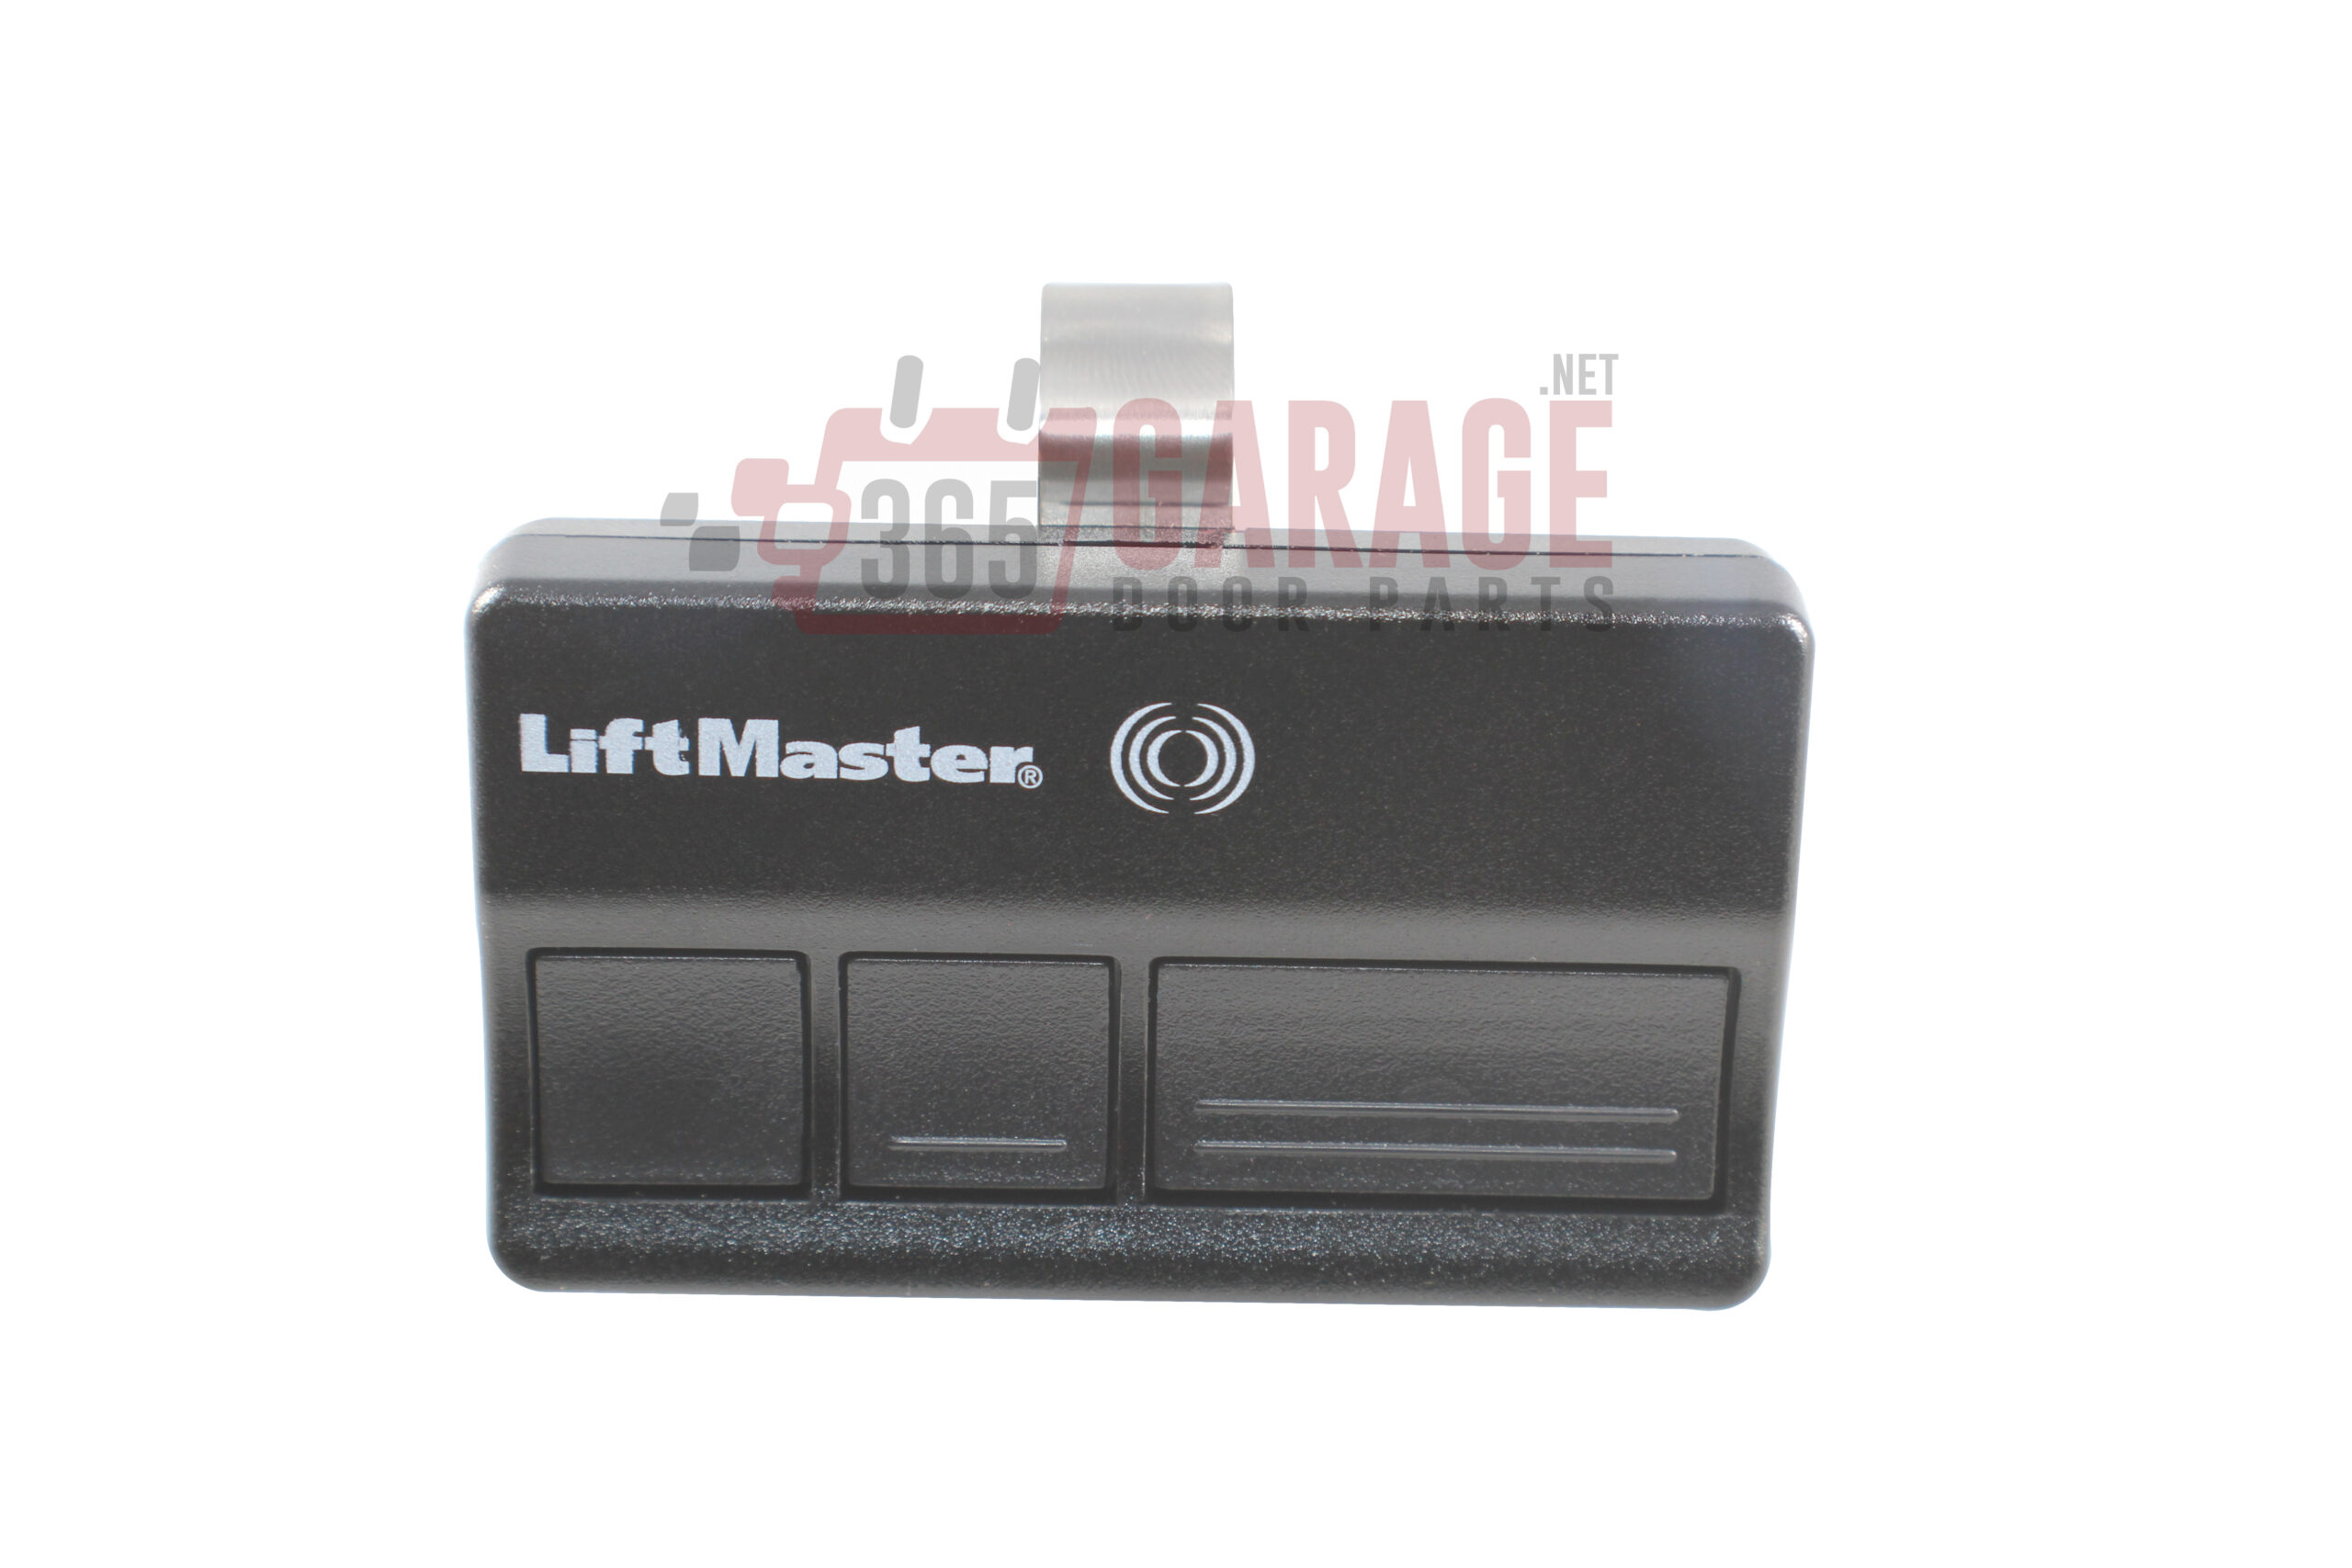 LiftMaster Garage Door Openers 373LM Three Button Remote Control ... - 373lm 3  1 ScaleD